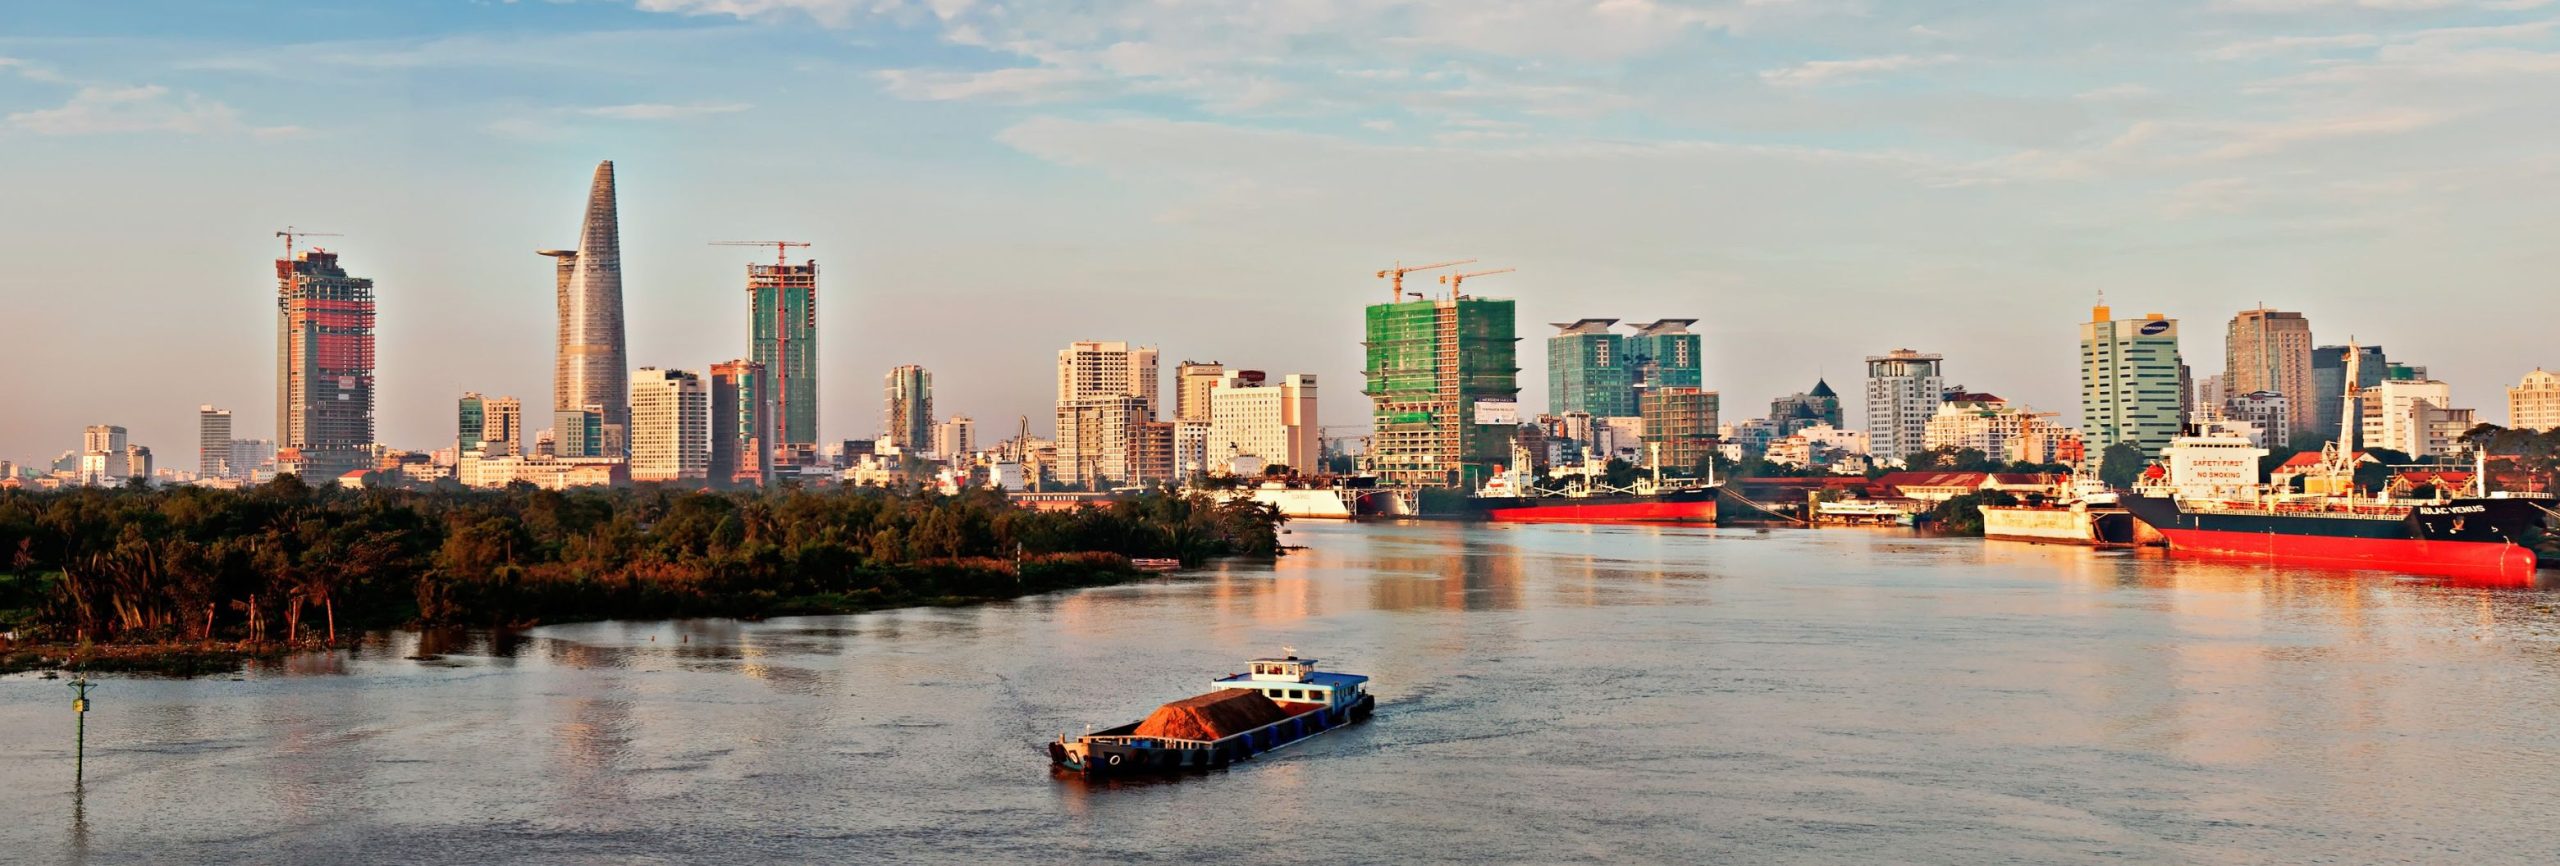 One day in Ho Chi Minh city – How to plan a perfect itinerary?